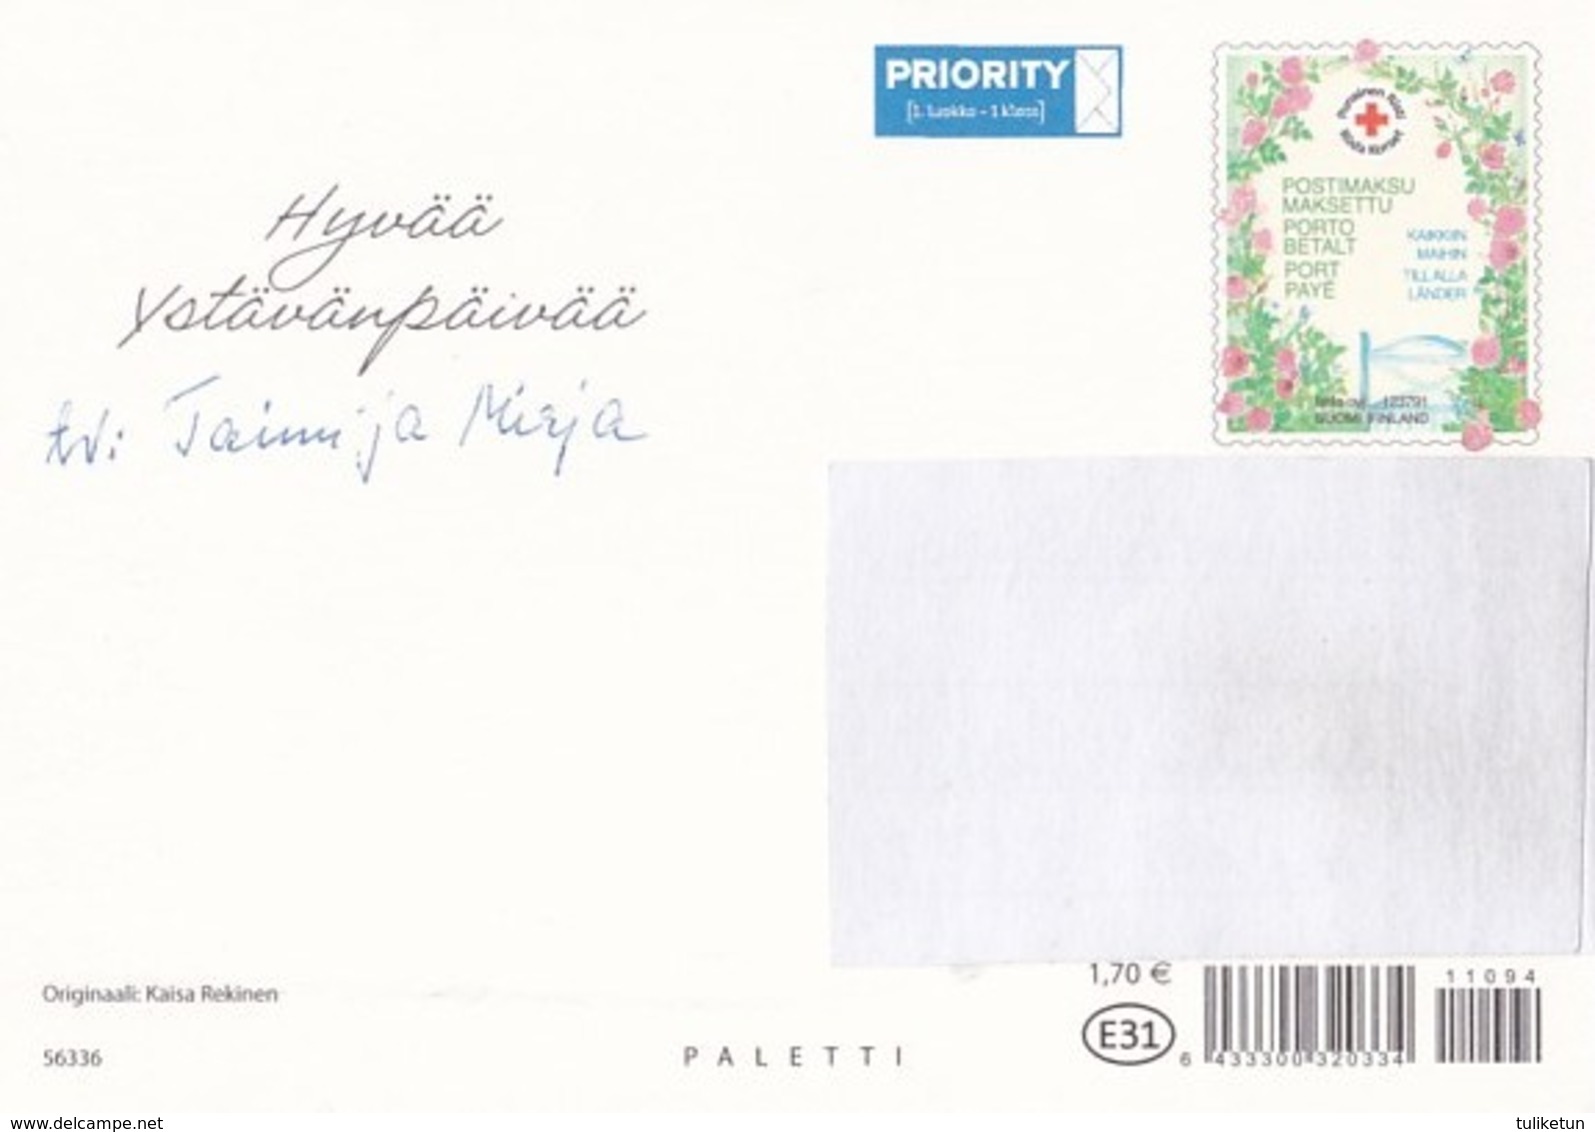 Postal Stationery - Women - Ladies Flying With An Umbrella - Red Cross - Suomi Finland - Postage Paid - Postal Stationery